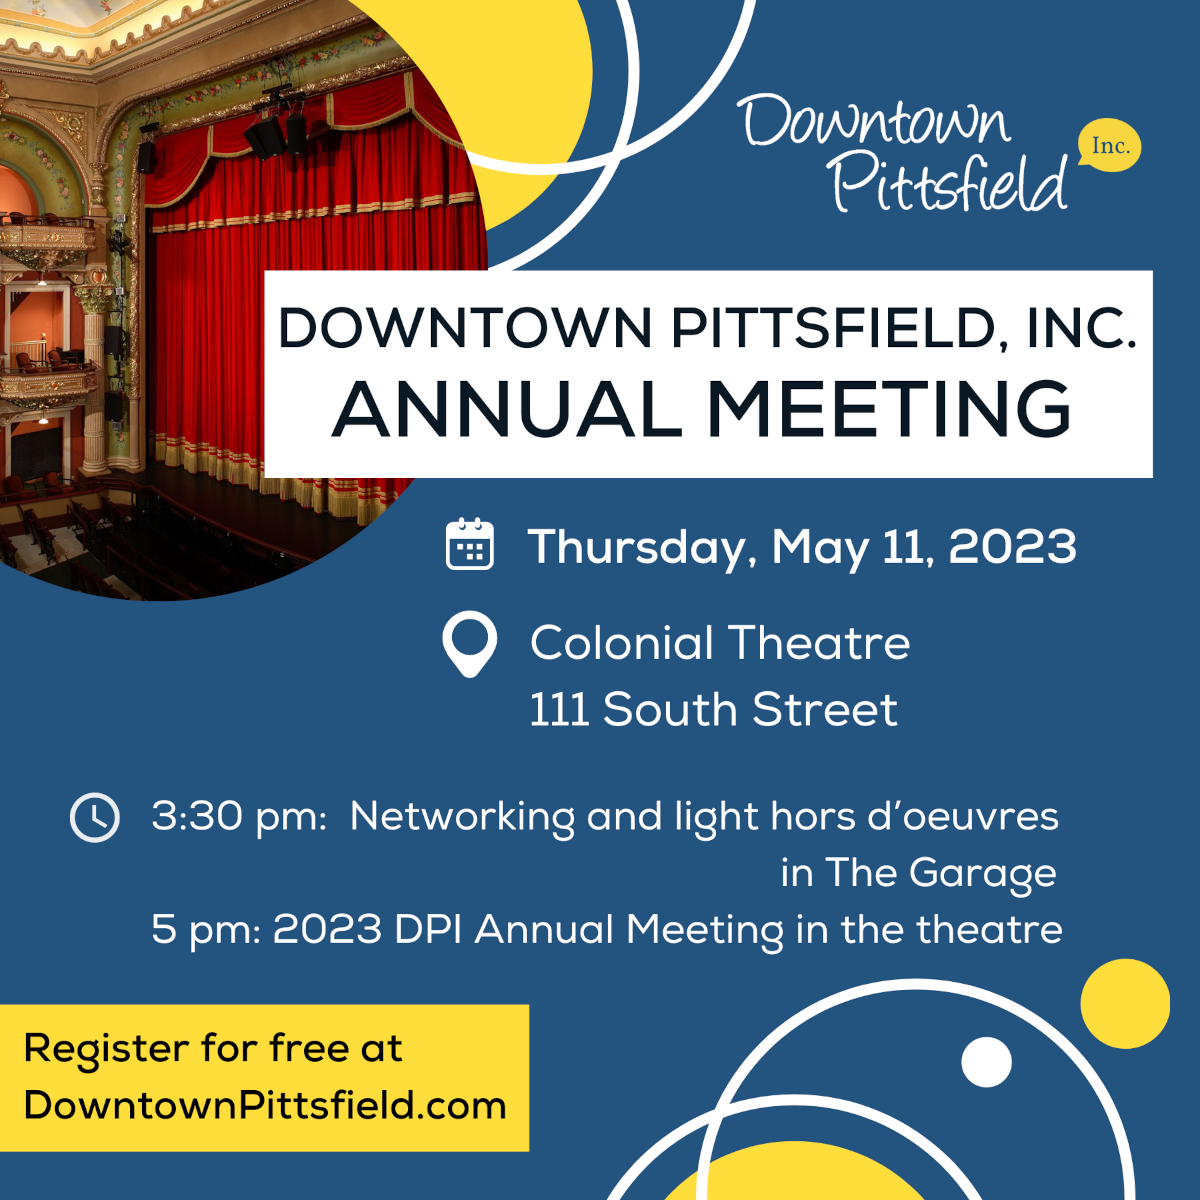 Downtown Pittsfield, Inc. Annual Meeting 2023